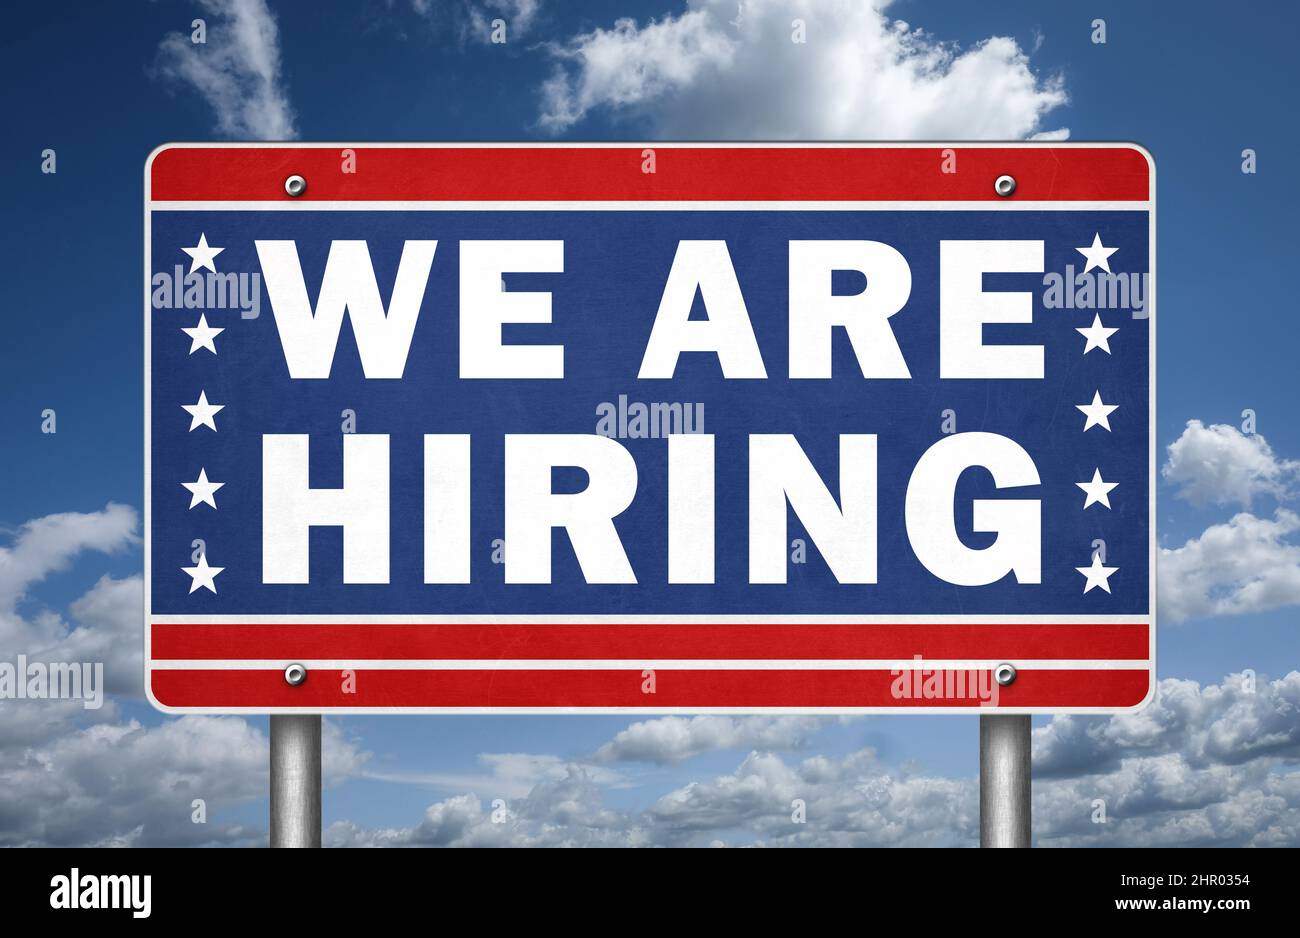 We are hiring - recruitment message Stock Photo